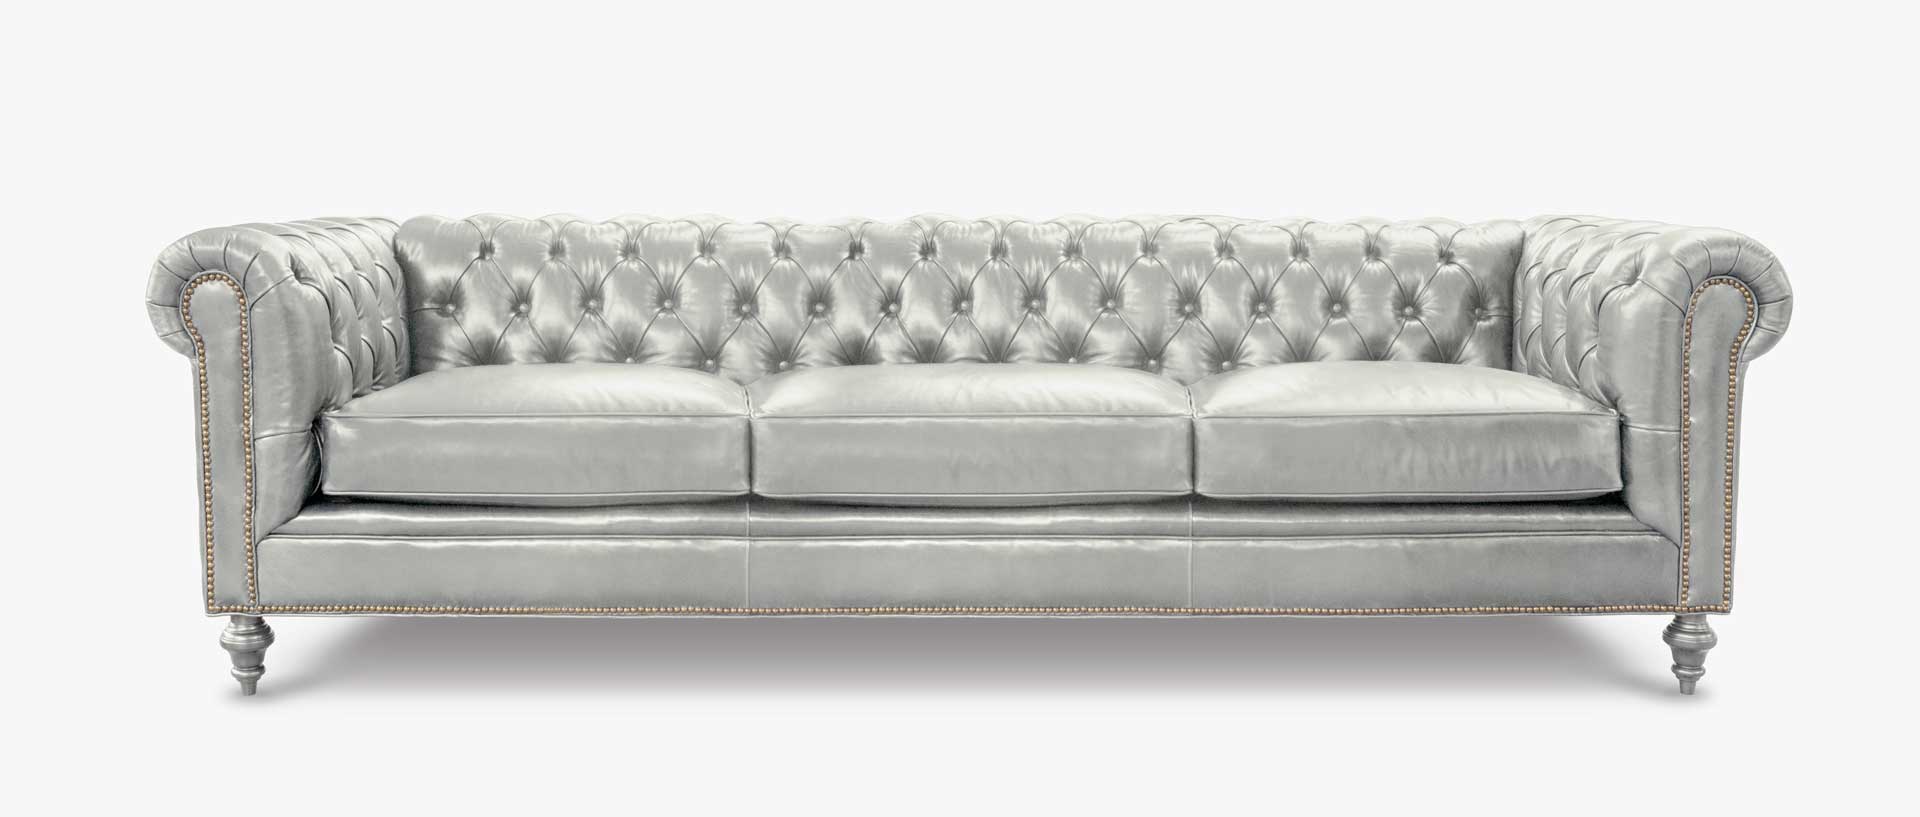 Fitzgerald White Vintage Chesterfield Sofa